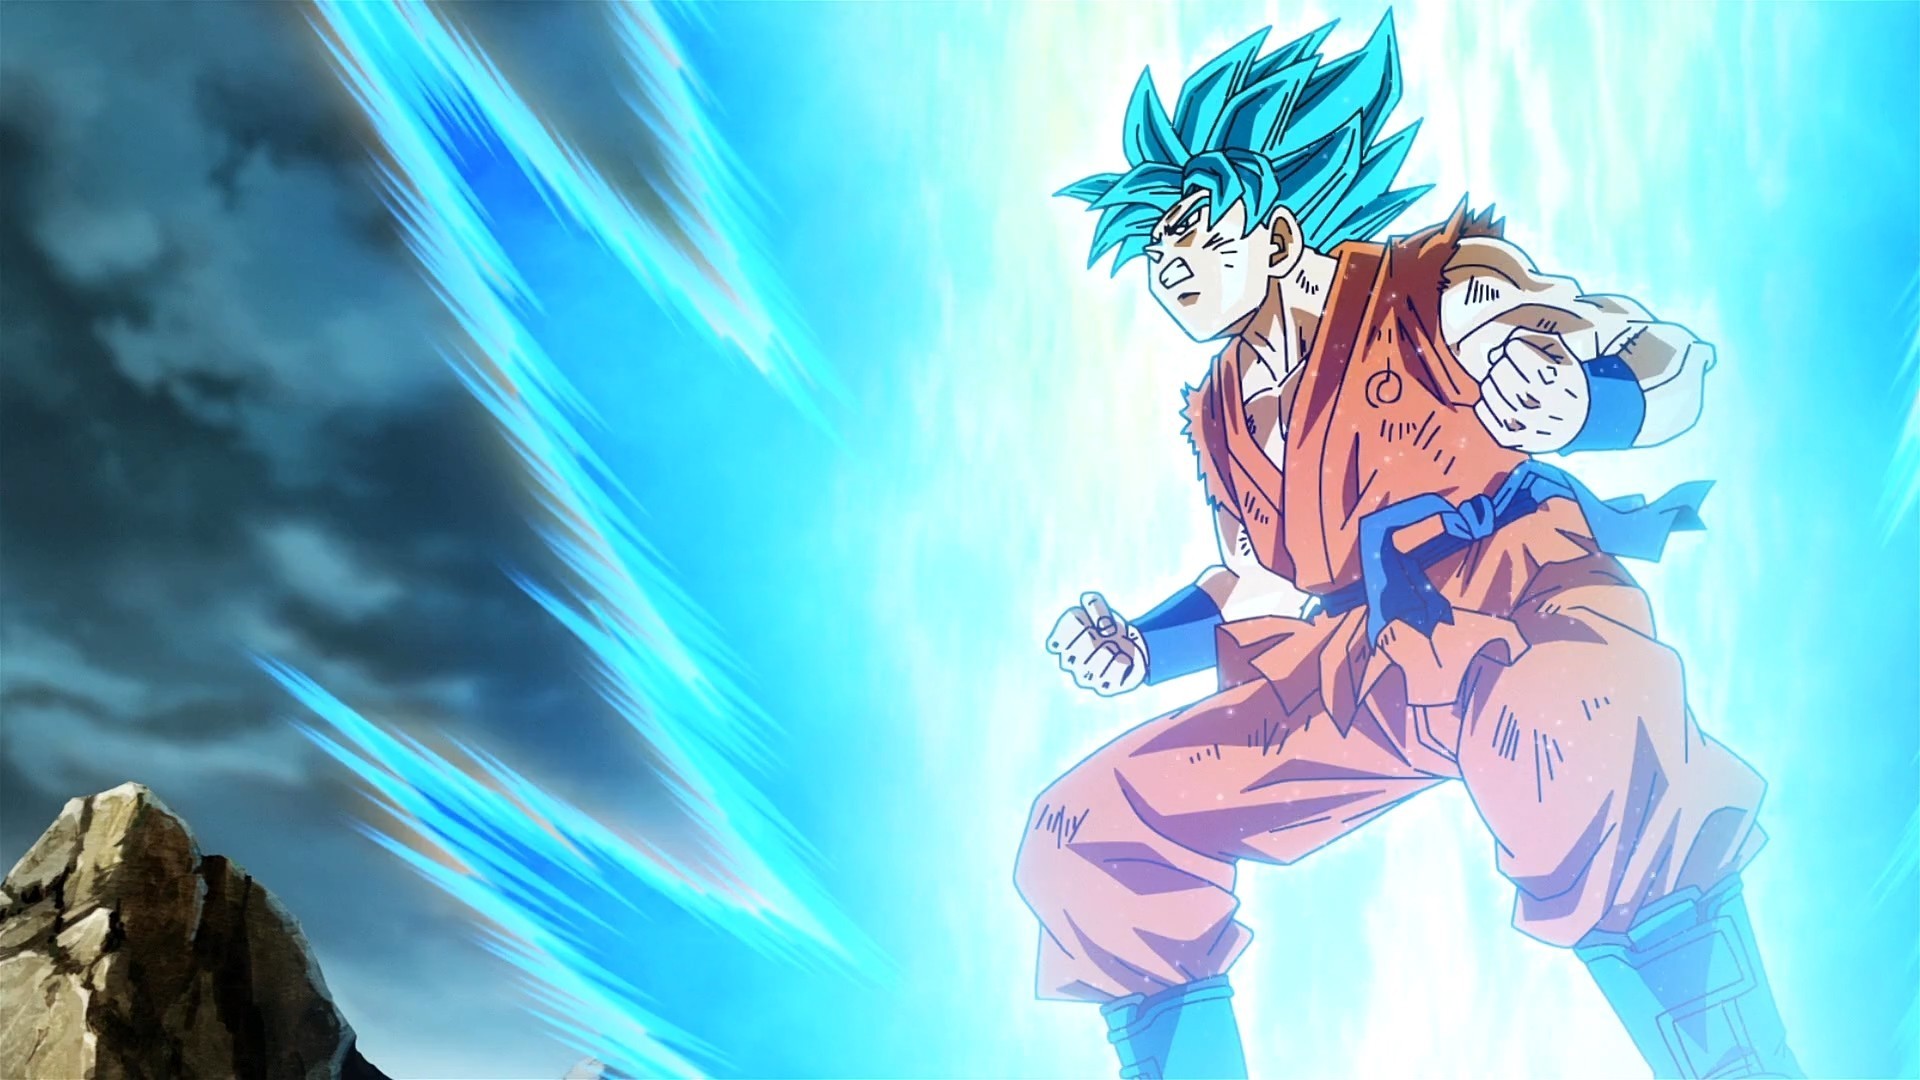 Goku SSJ Blue Desktop Backgrounds HD with image resolution 1920x1080 pixel. You can use this wallpaper as background for your desktop Computer Screensavers, Android or iPhone smartphones